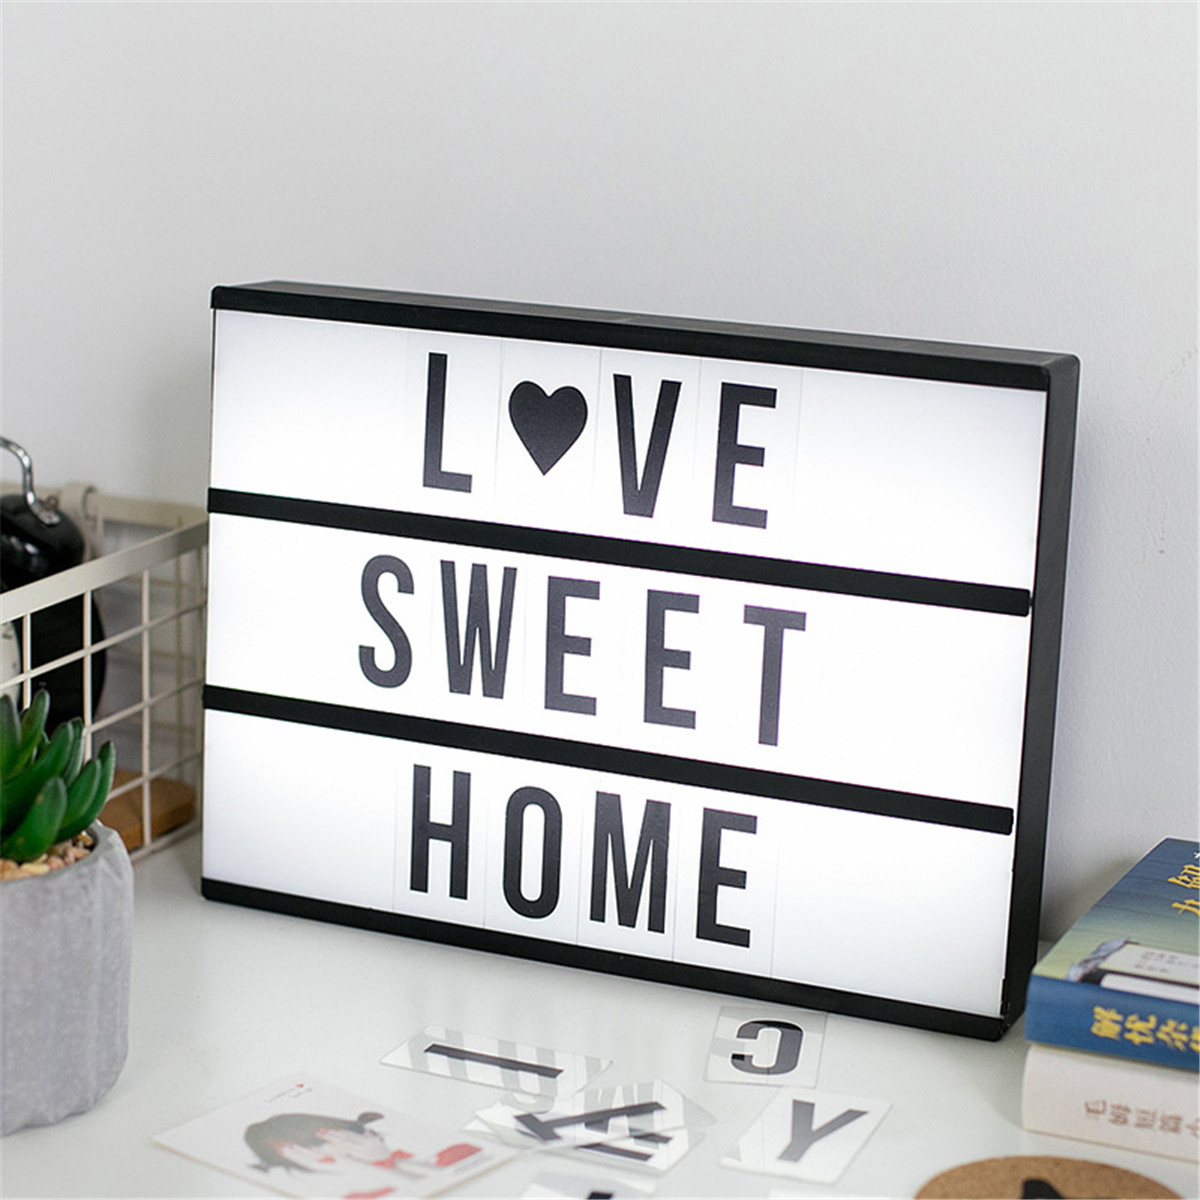 141-Letters-A4-Cinematic-Cinema-Light-Up-Letter-Box-Sign-Light-Box-Wedding-Party-Baby-Toys-1397609